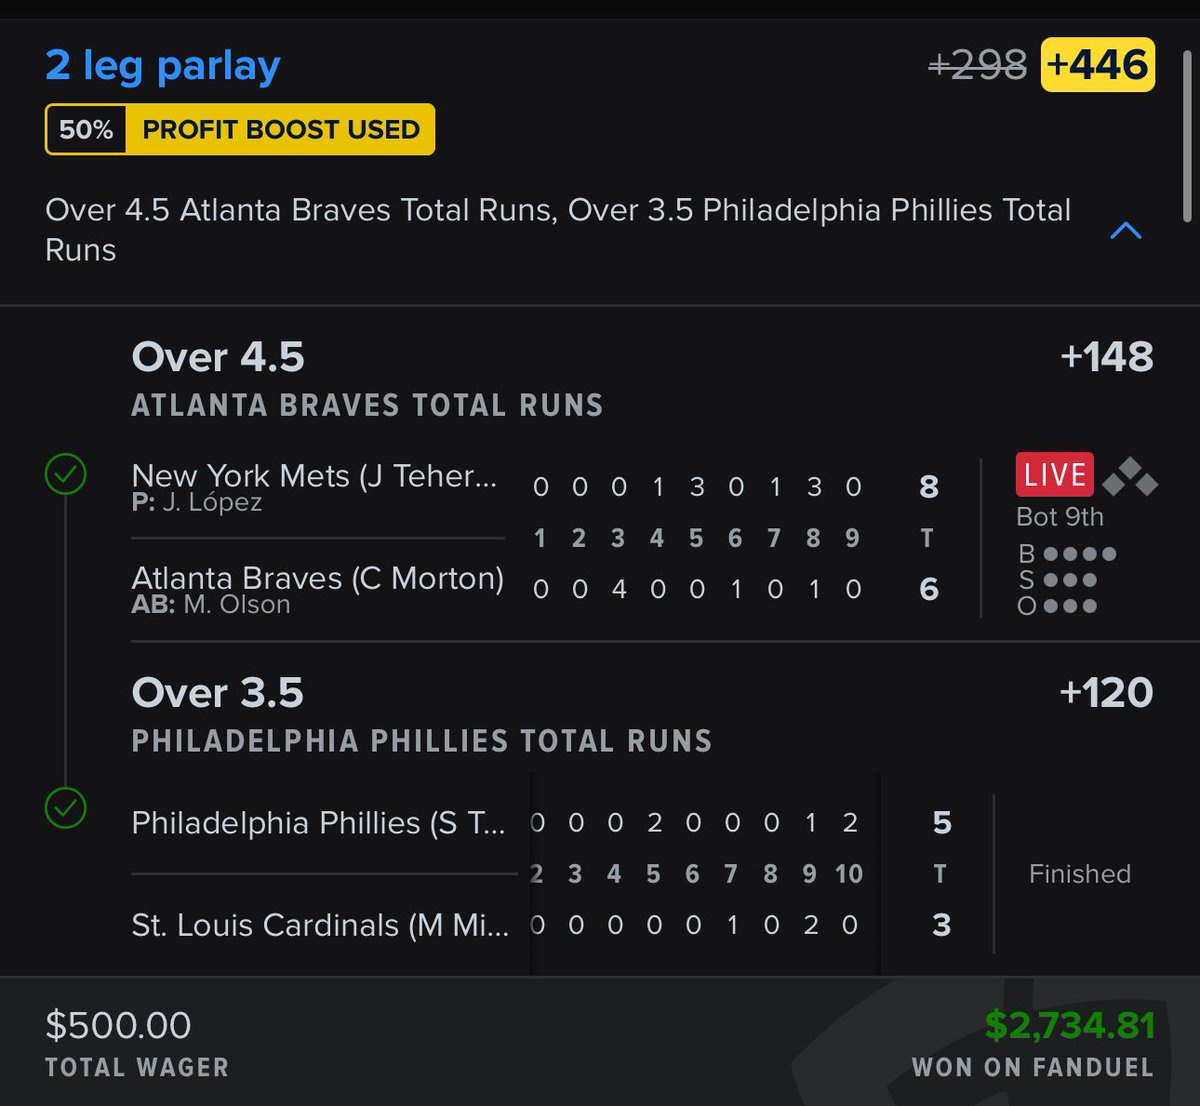 Little extra inning magic 💰 ✅ Whop.com/larrys-lounge